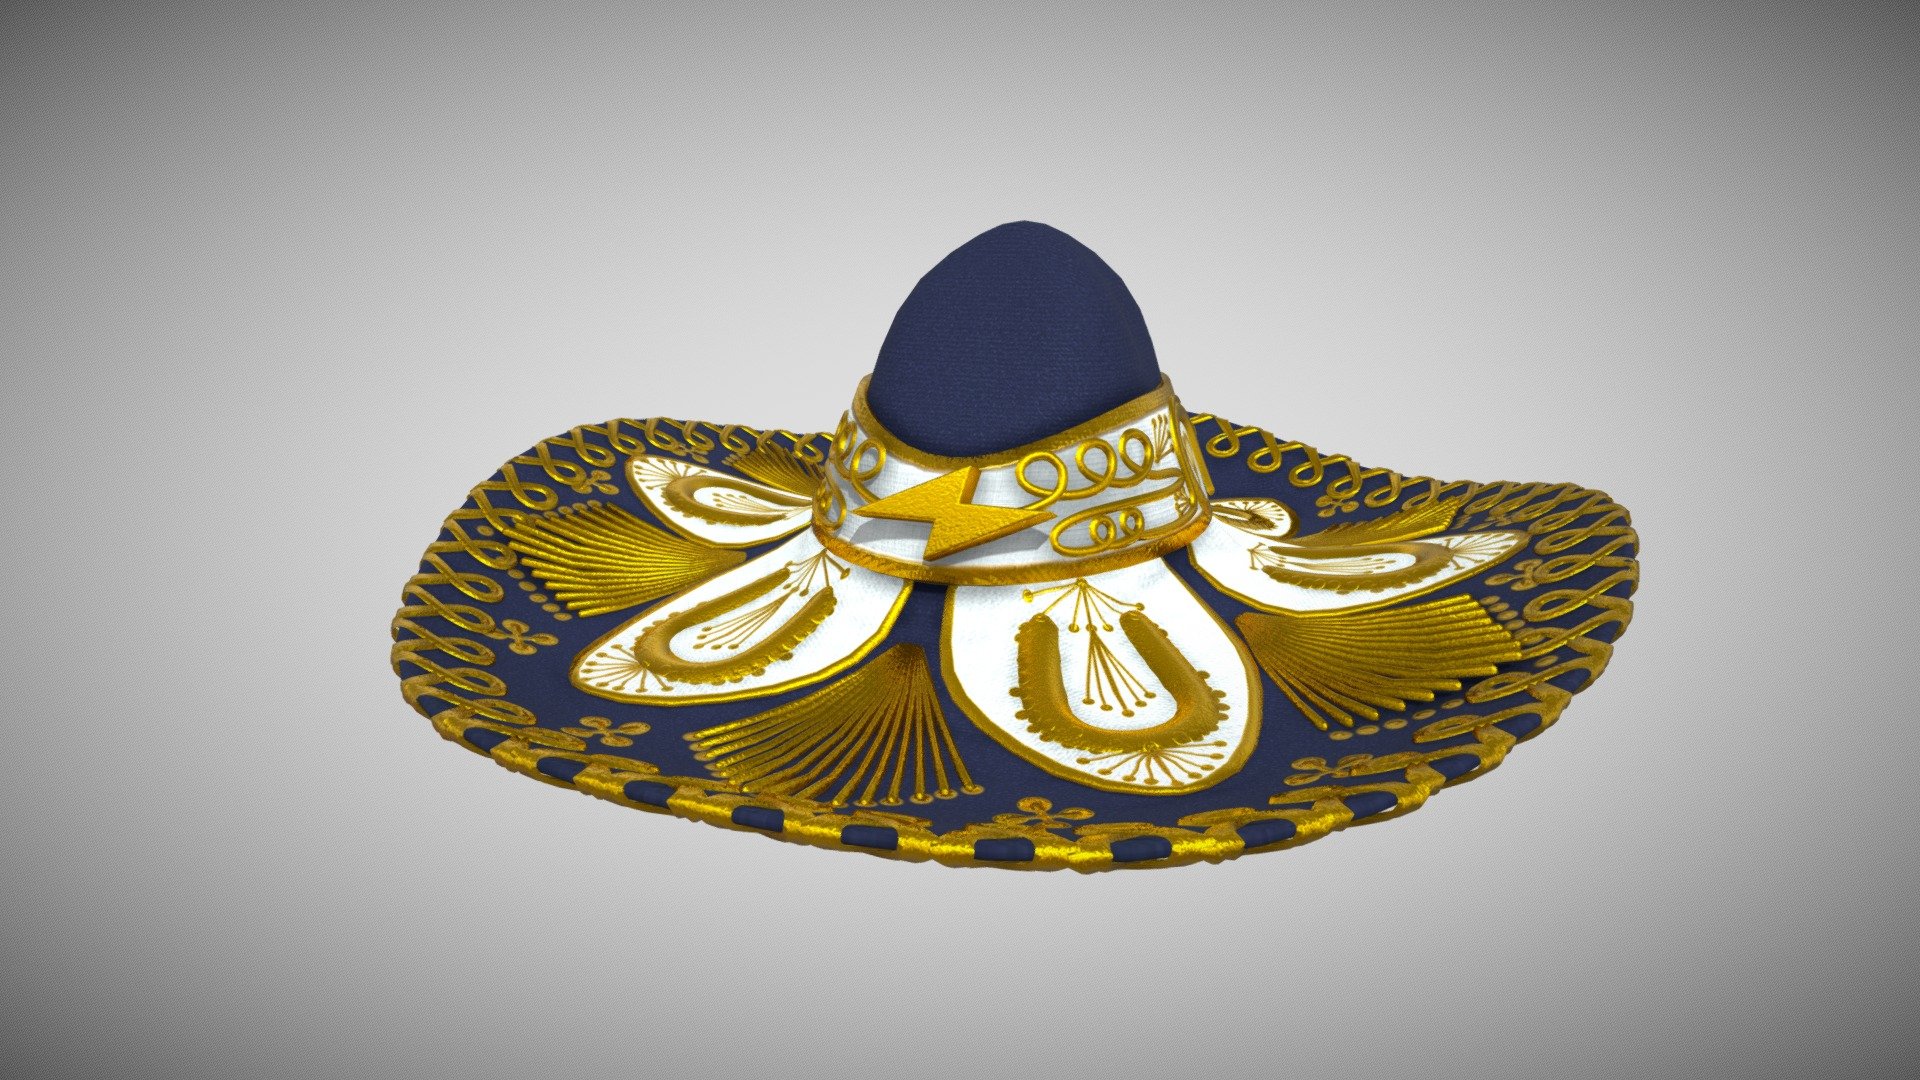 Sambrero hat for SparkAR instagram filter 

limitations for platform is 4 mb for all project and 1024x1024 for textures - Sombrero hat - 3D model by reezzy (@whoisreezzy) 3d model